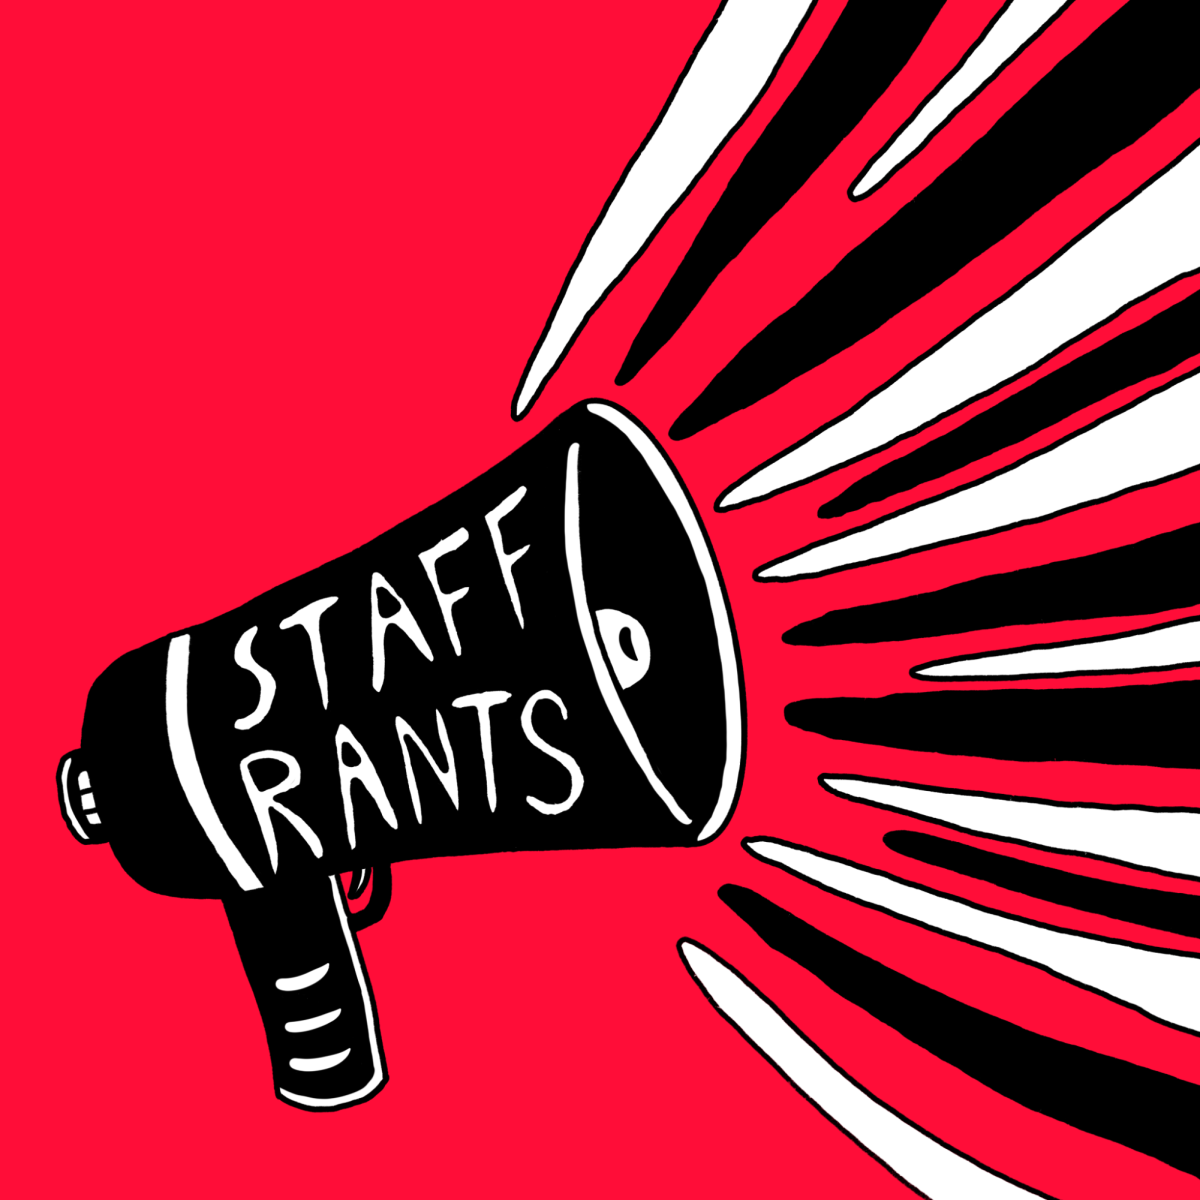 An illustration of a black megaphone that reads ‘STAFF RANTS’ in white letters. There are black and white lines coming out of the megaphone. The background is red.